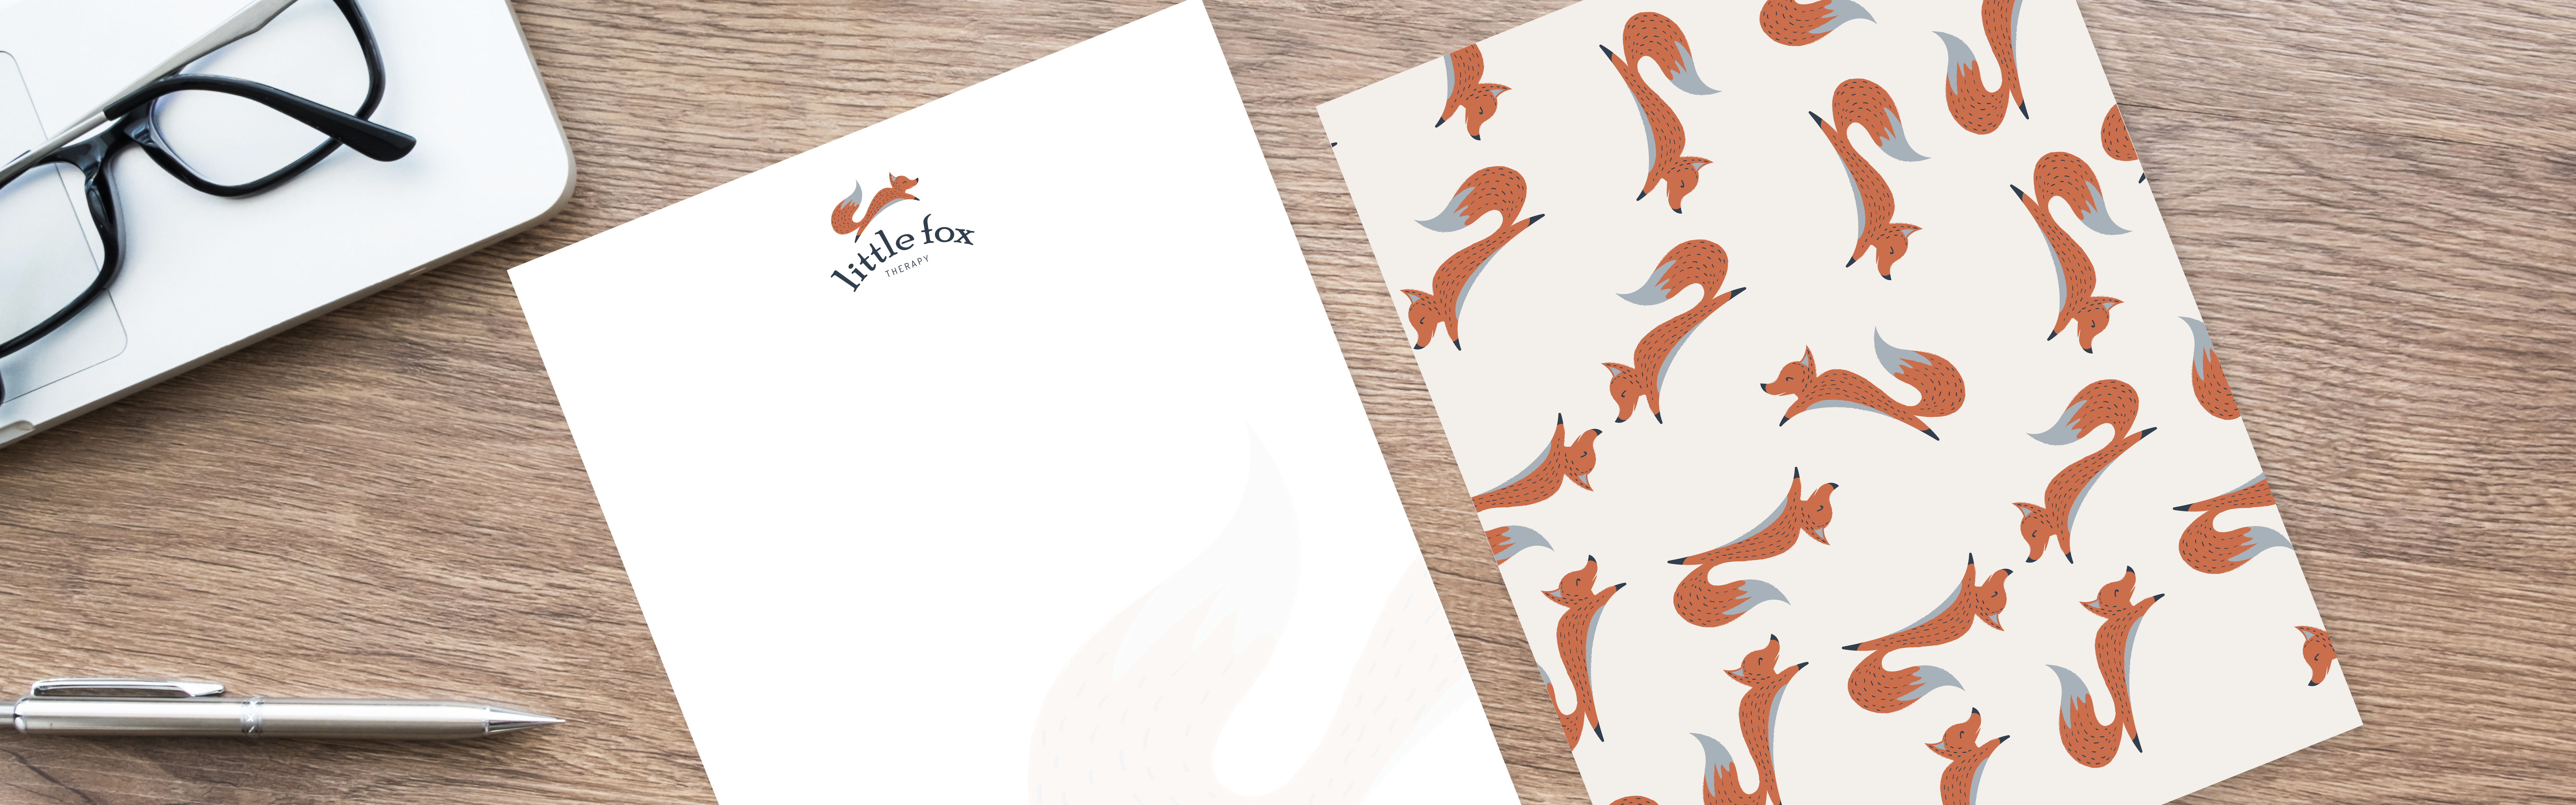 A pair of Little Fox Therapy stationery papers with fox patterns next to a silver pen and glasses on a desk.